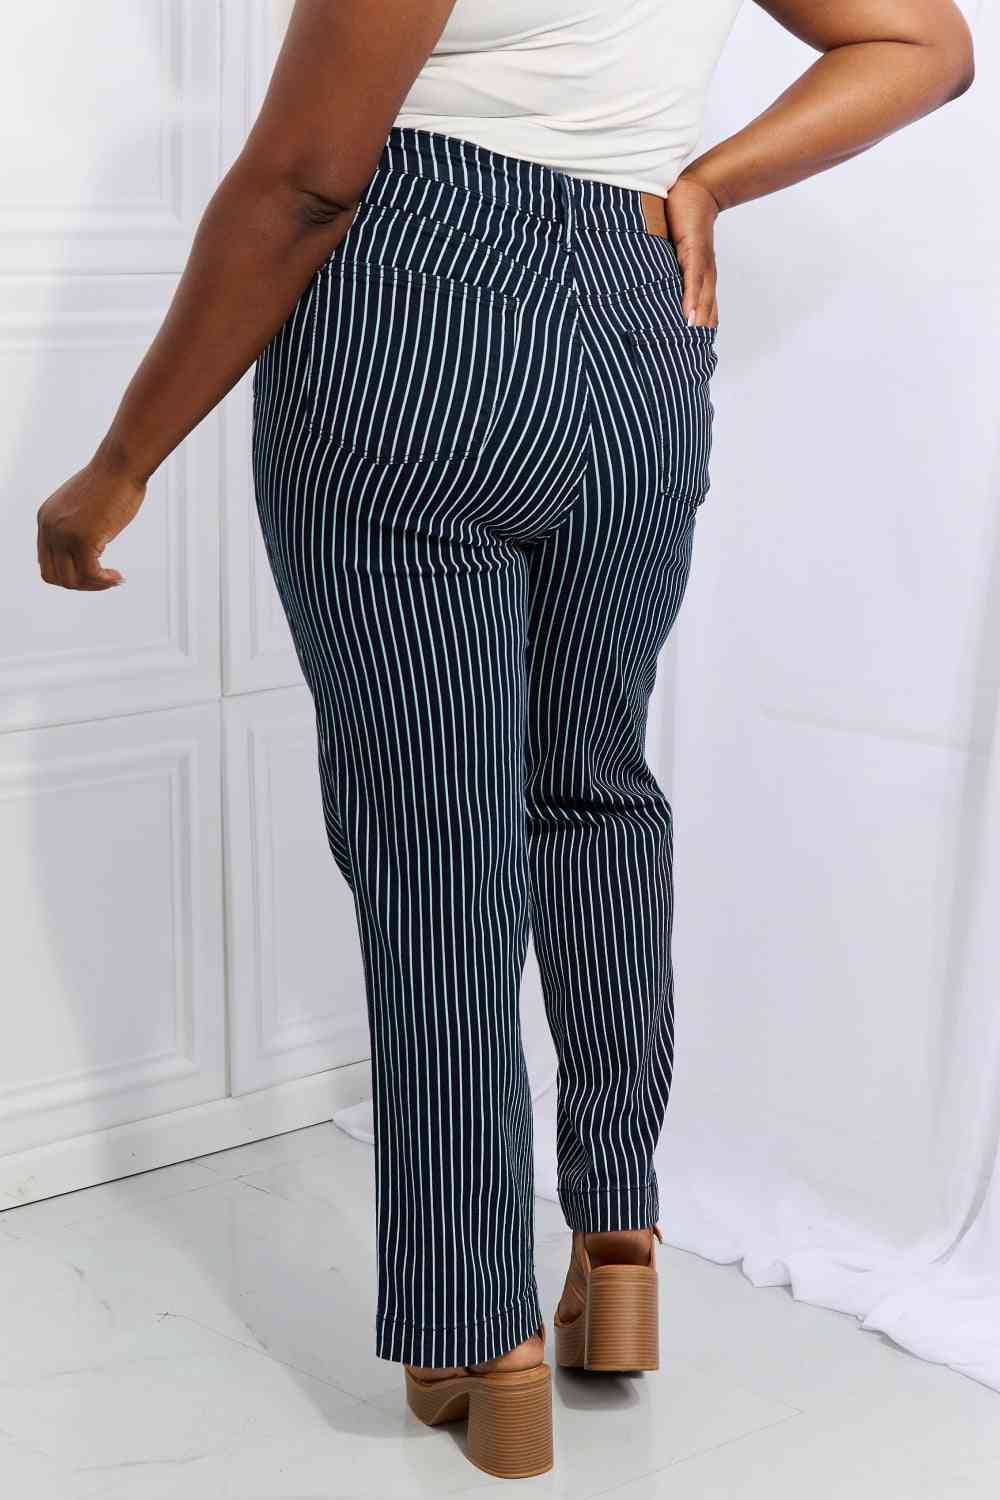 Judy Blue Cassidy Full Size High Waisted Tummy Control Striped Straight Jeans - Just Enuff Sexy